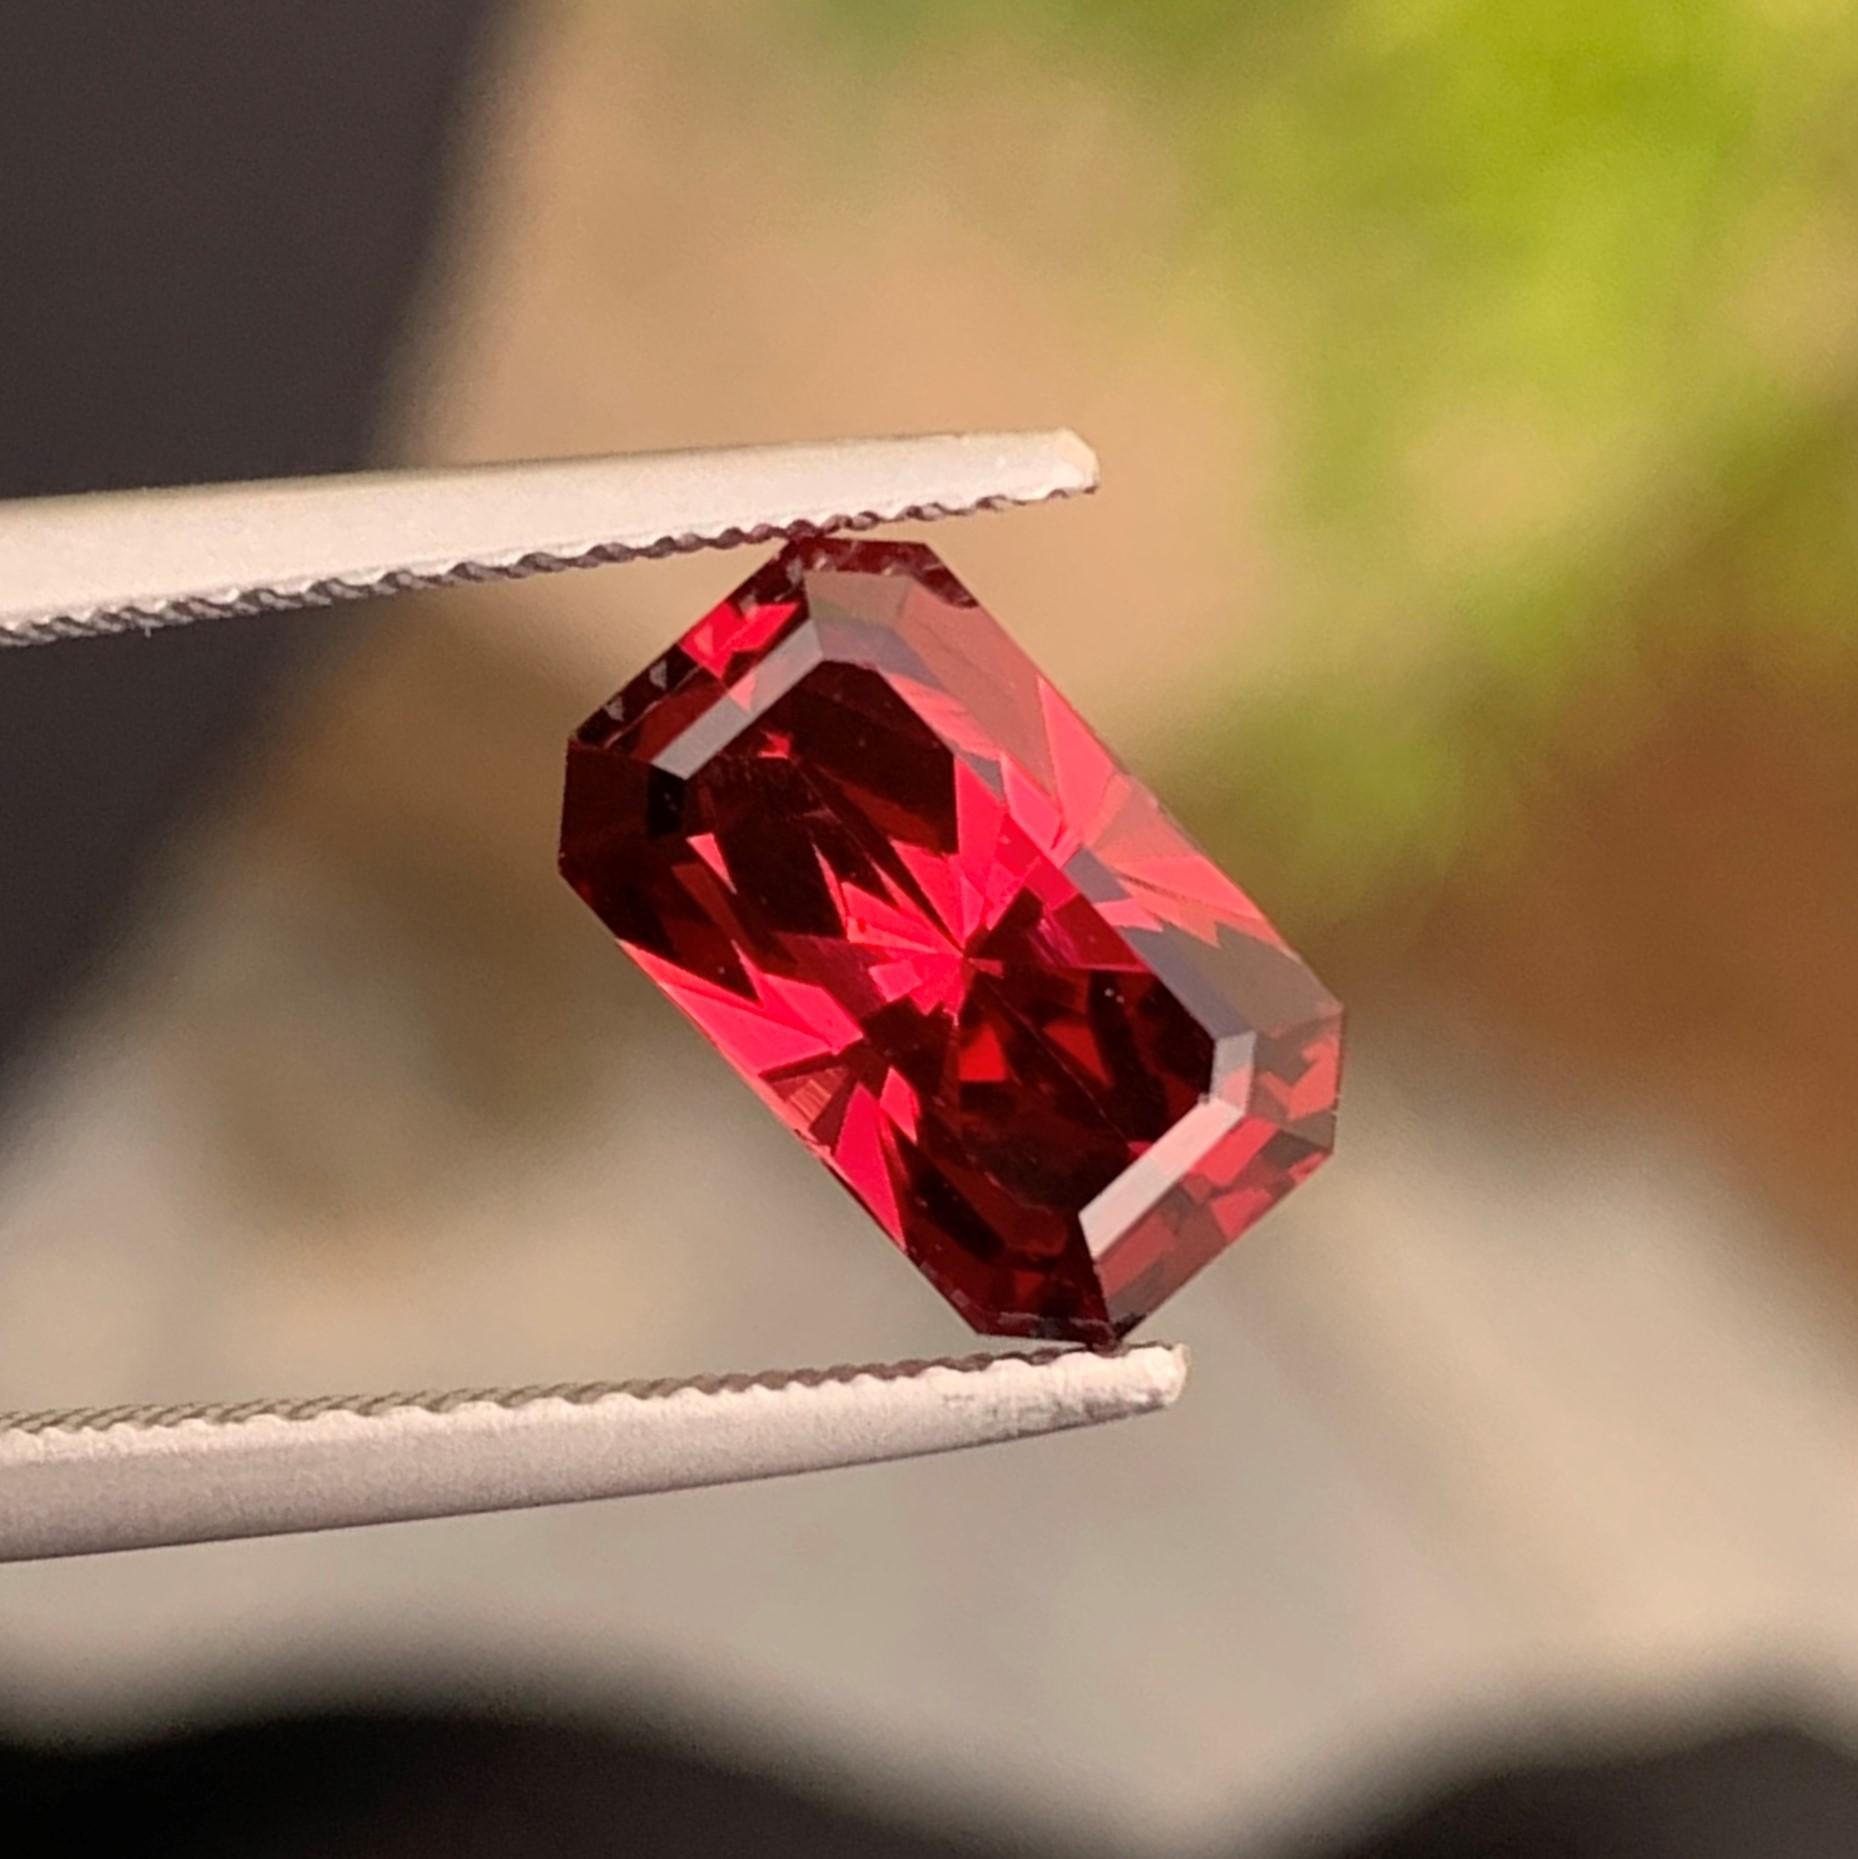 Faceted Rhodolite Garnet
Weight: 3.0 Carats Both
Dimension: 10x6x5.3 Mm
Origin: Madagascar Africa
Color: Red
Treatment: Non
Shape:Emerald
Cut: Fancy
The Rhodolite resembles pomegranate seeds, since both are eternal both are love symbols. This type